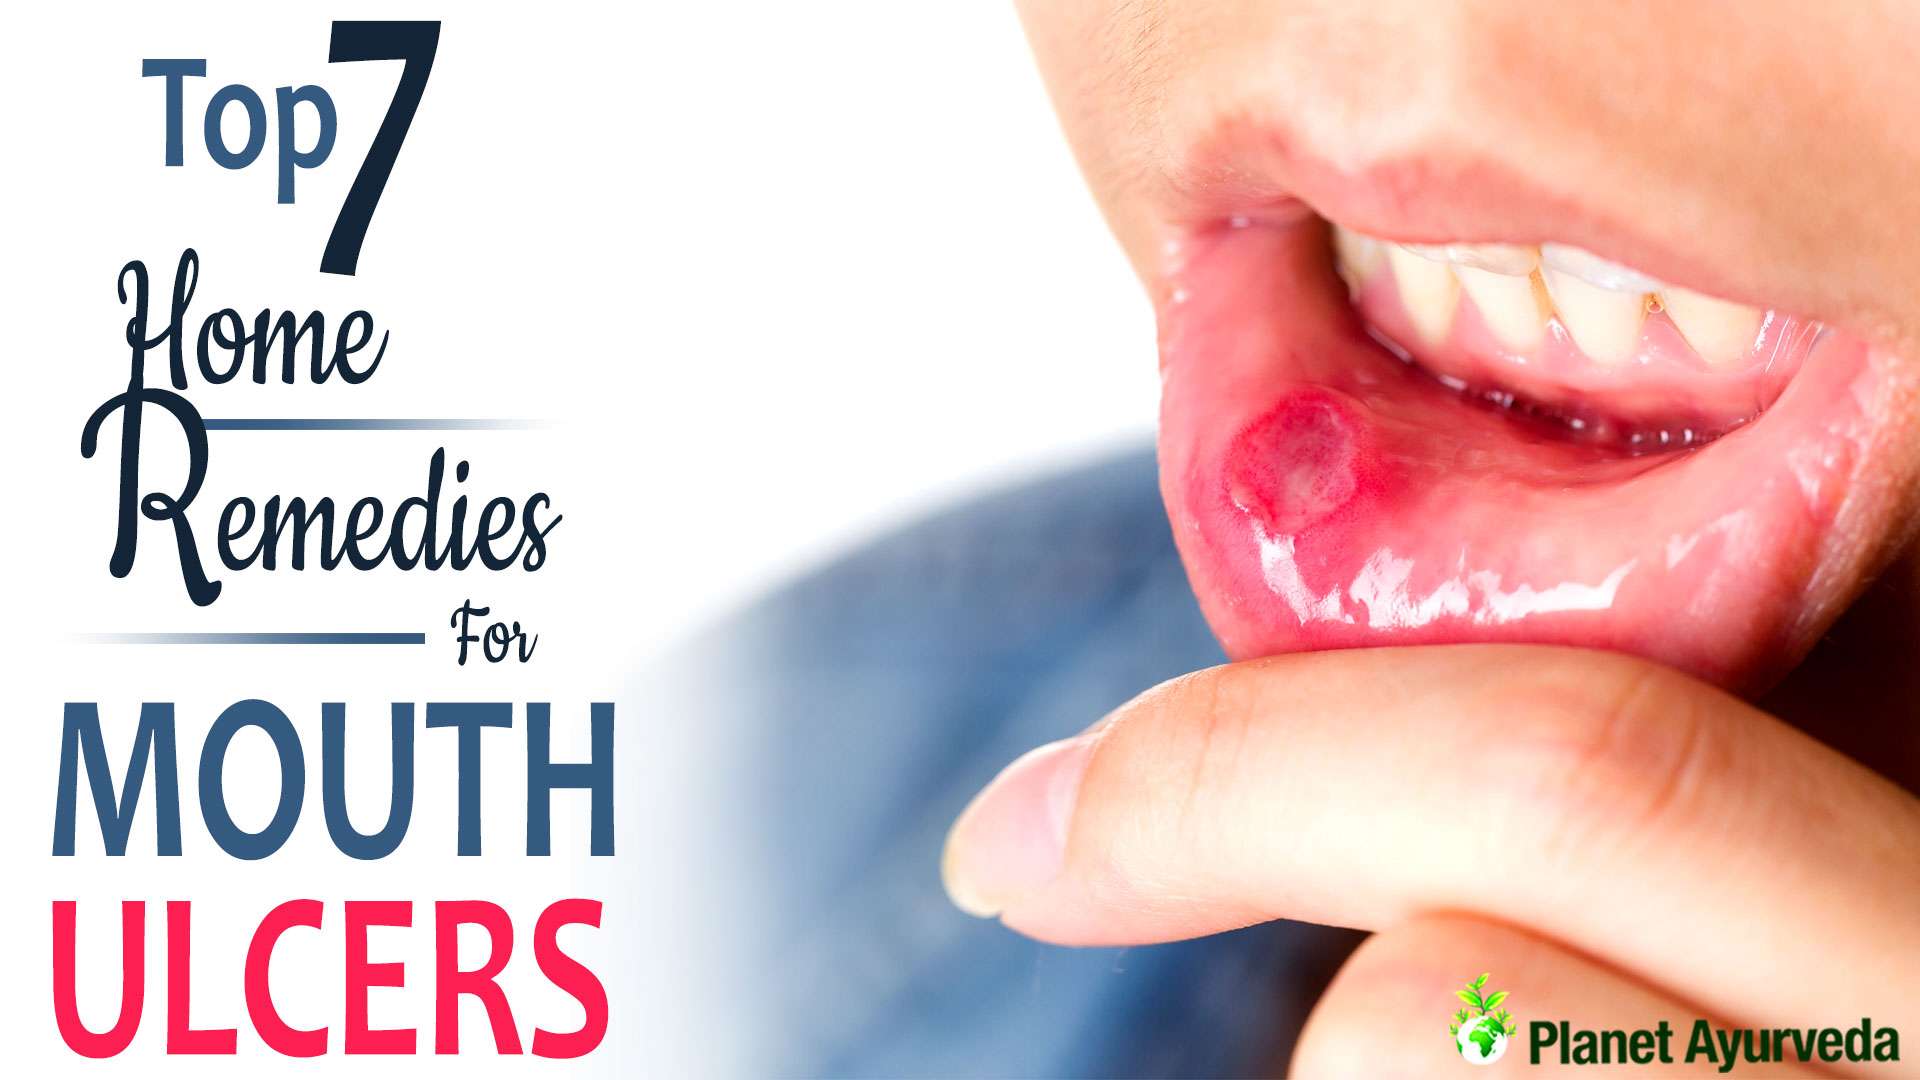 Top 7 Home Remedies for Mouth Ulcers: